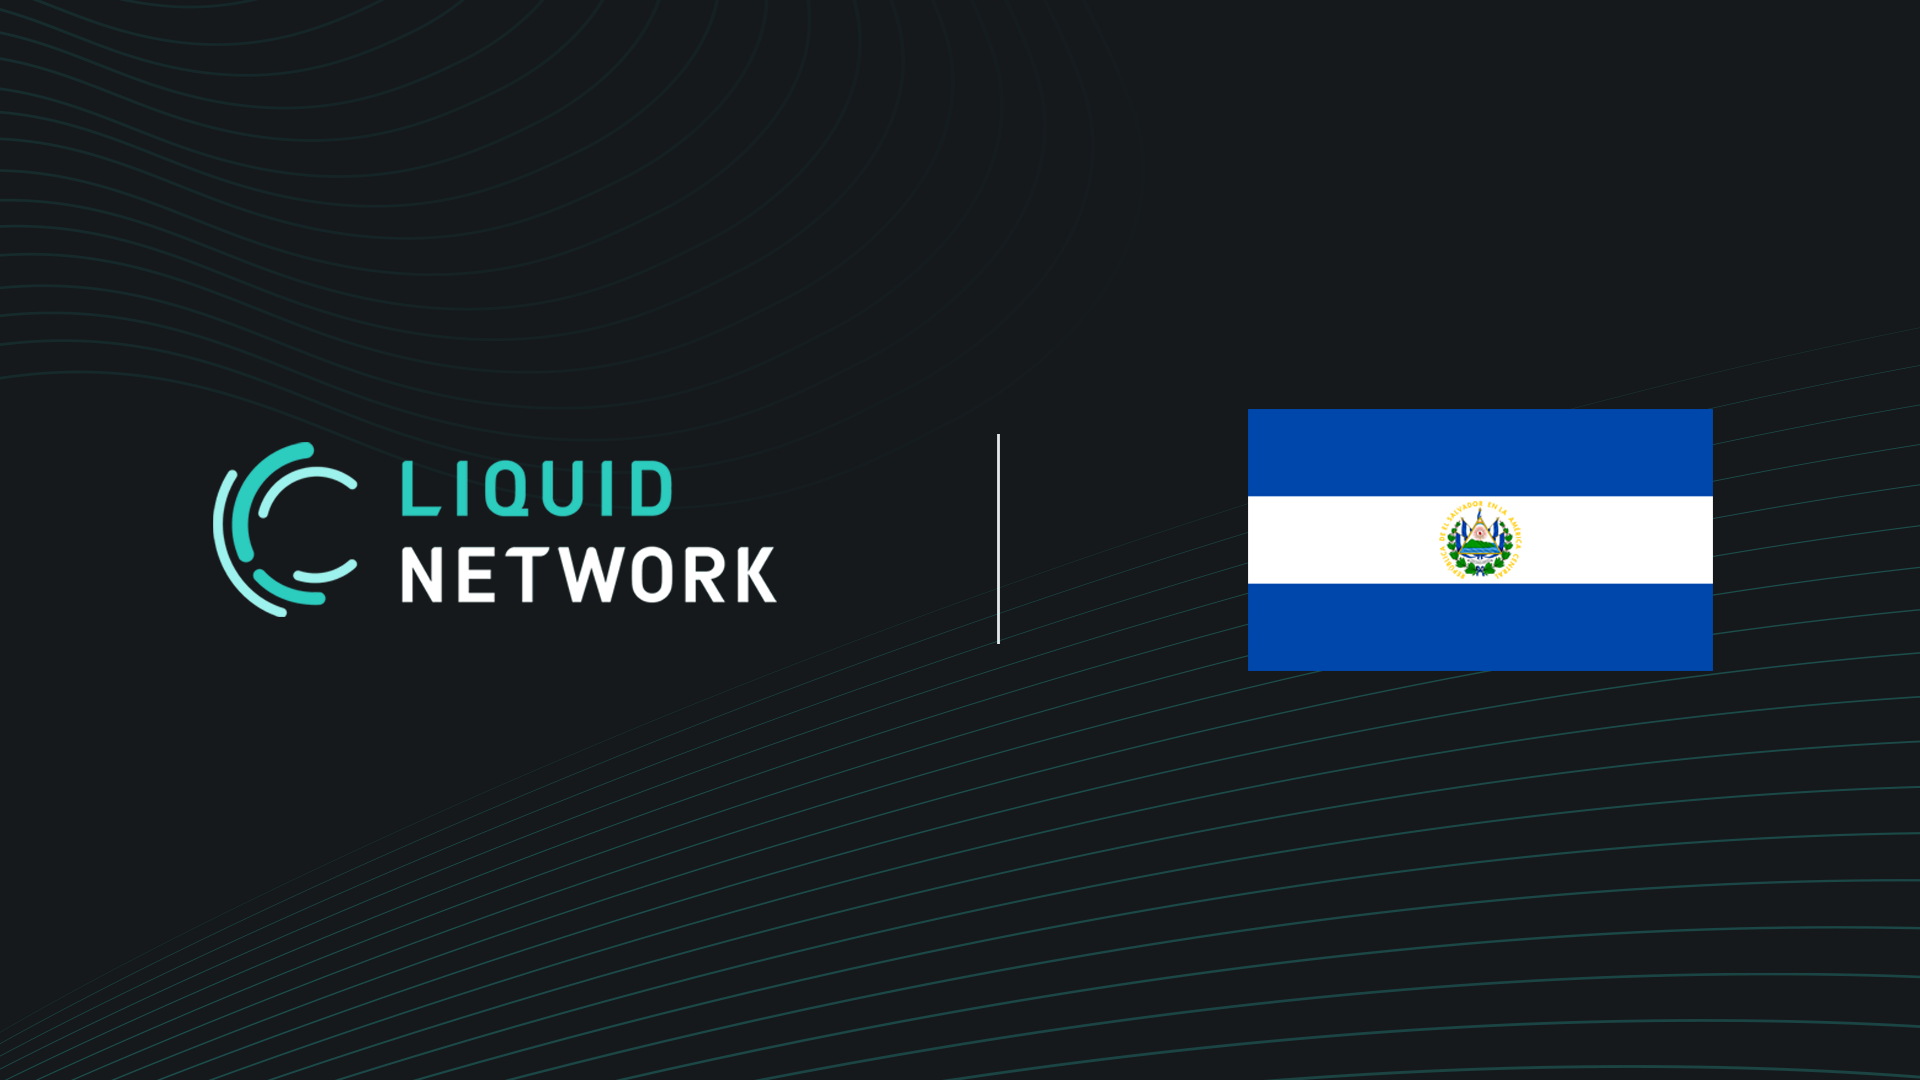 El Salvador to Issue $1B in Tokenized Bonds on the Liquid Network